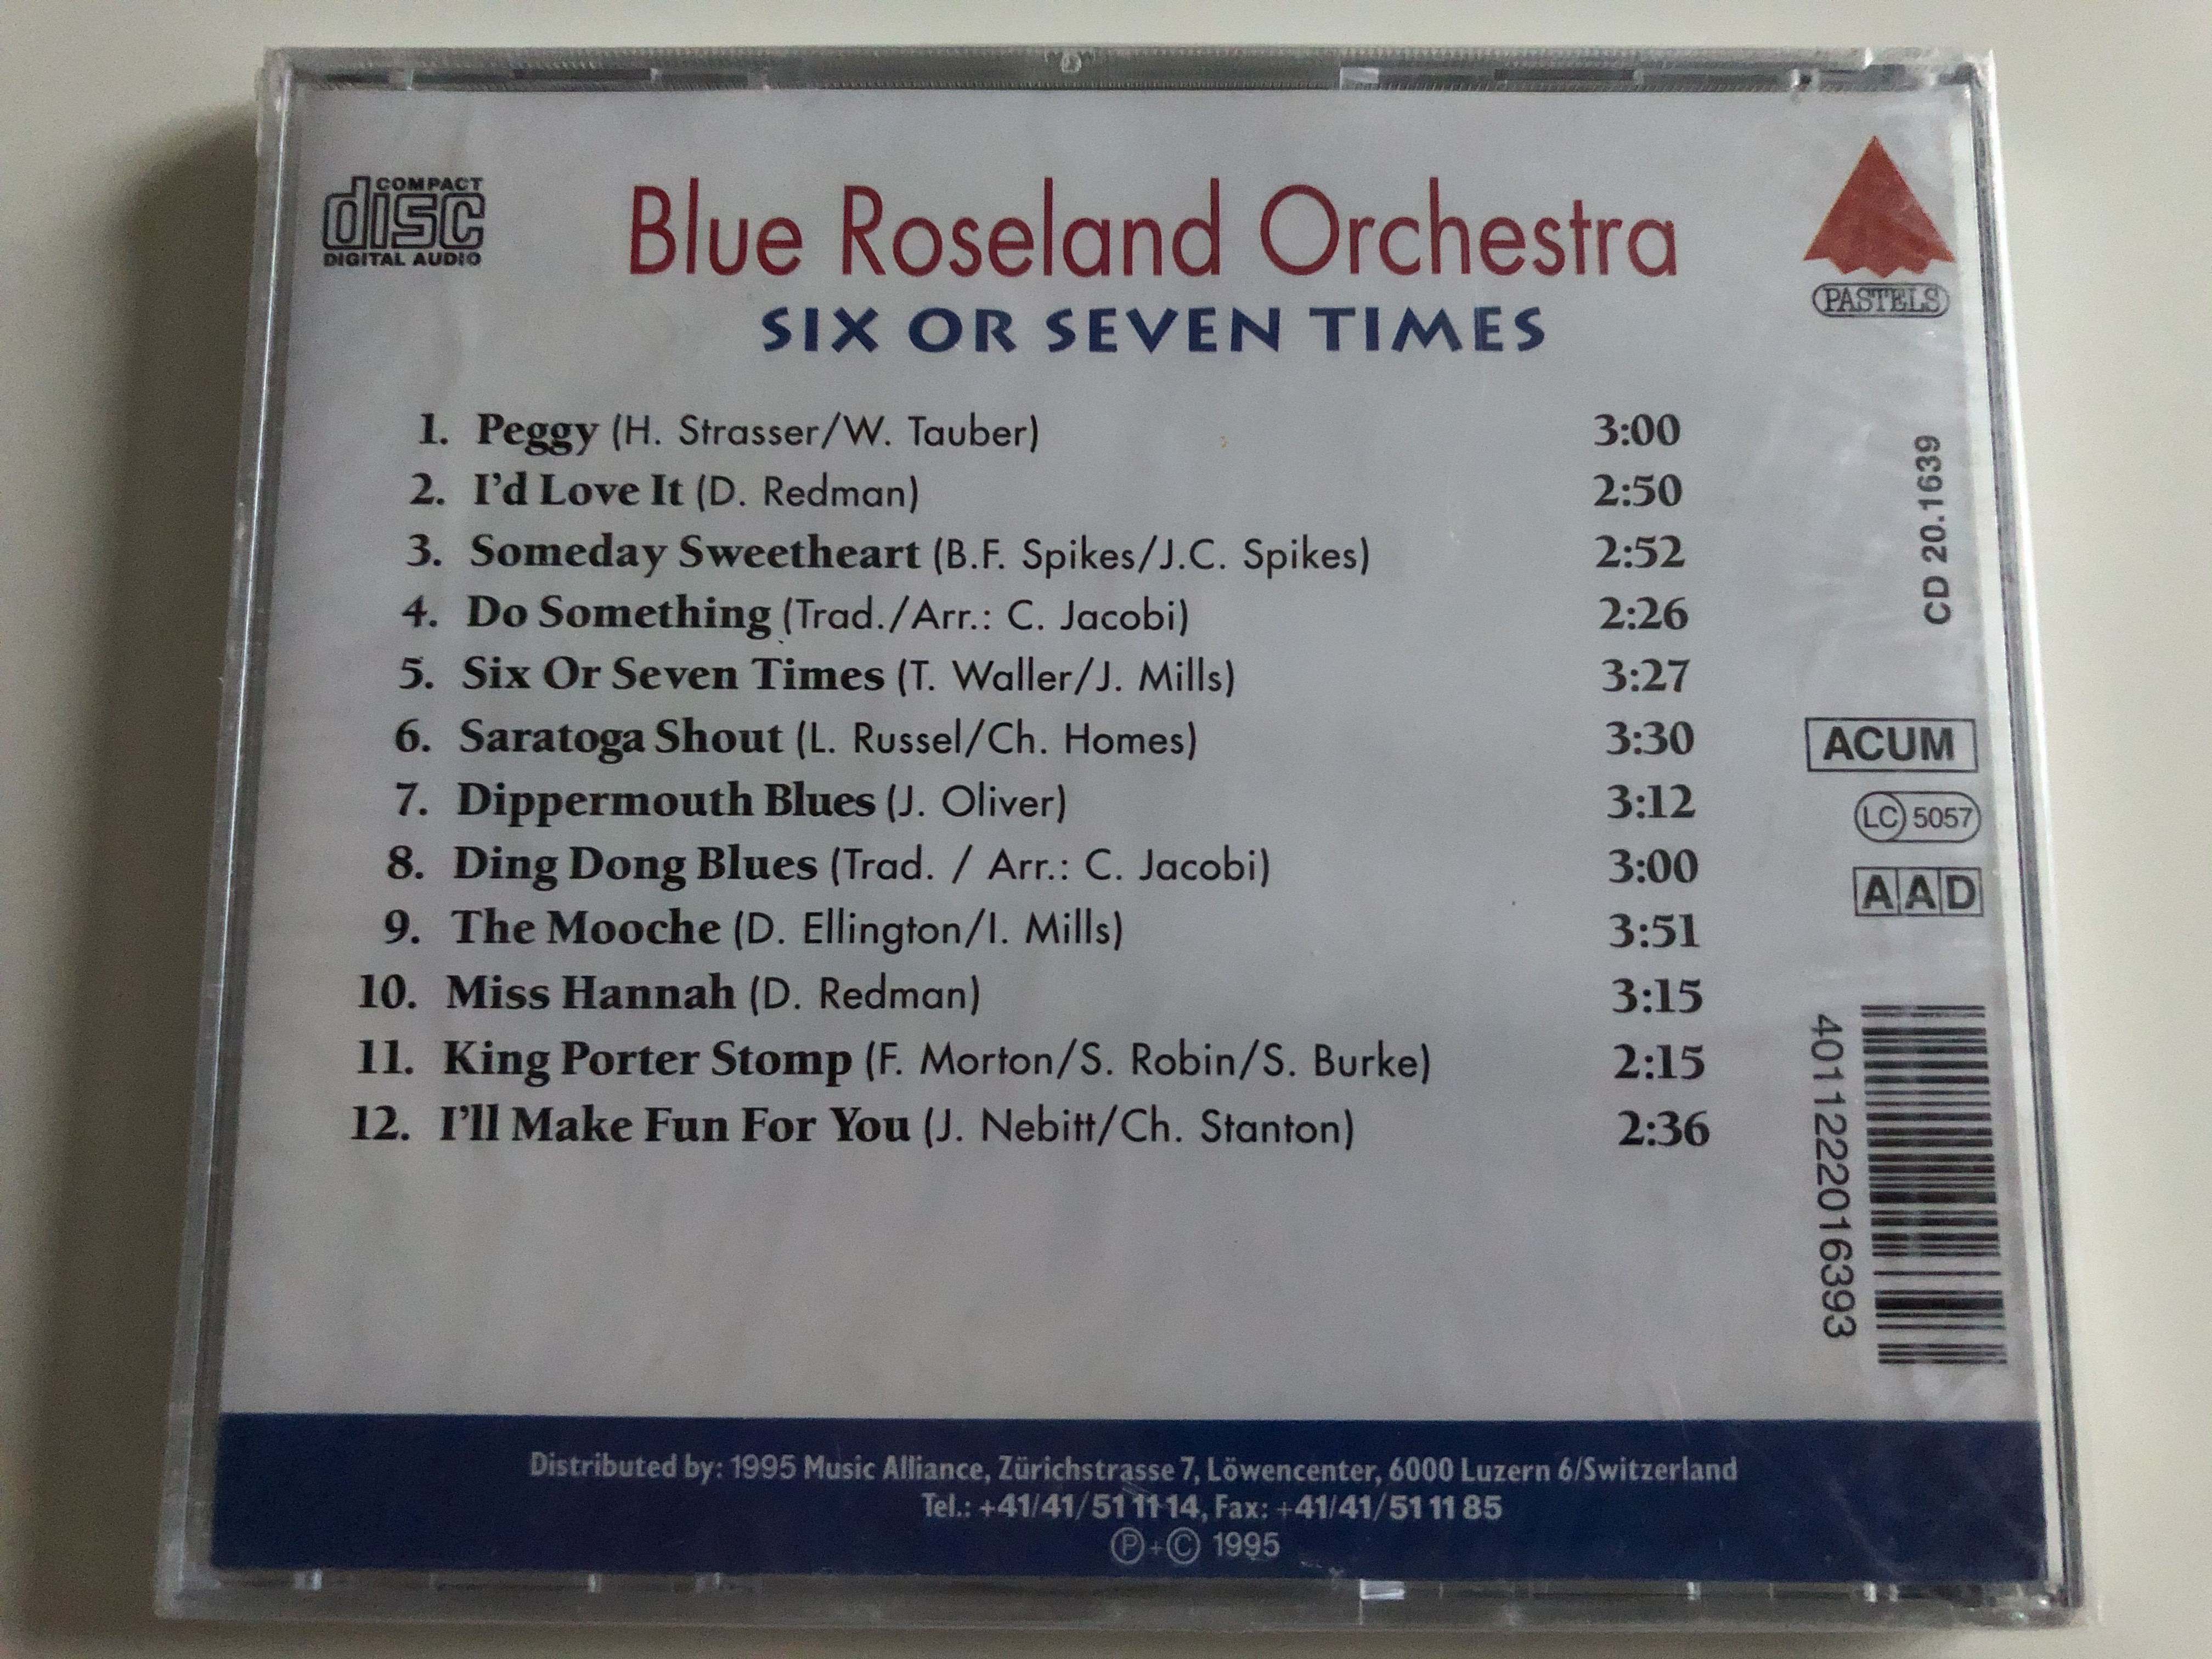 blue-roseland-orchestra-six-or-seven-times-peggy-saratoga-shout-dippermouth-blues-king-porter-stomp-digital-remastered-jazz-edition-pastels-audio-cd-1995-cd-20-2-.jpg